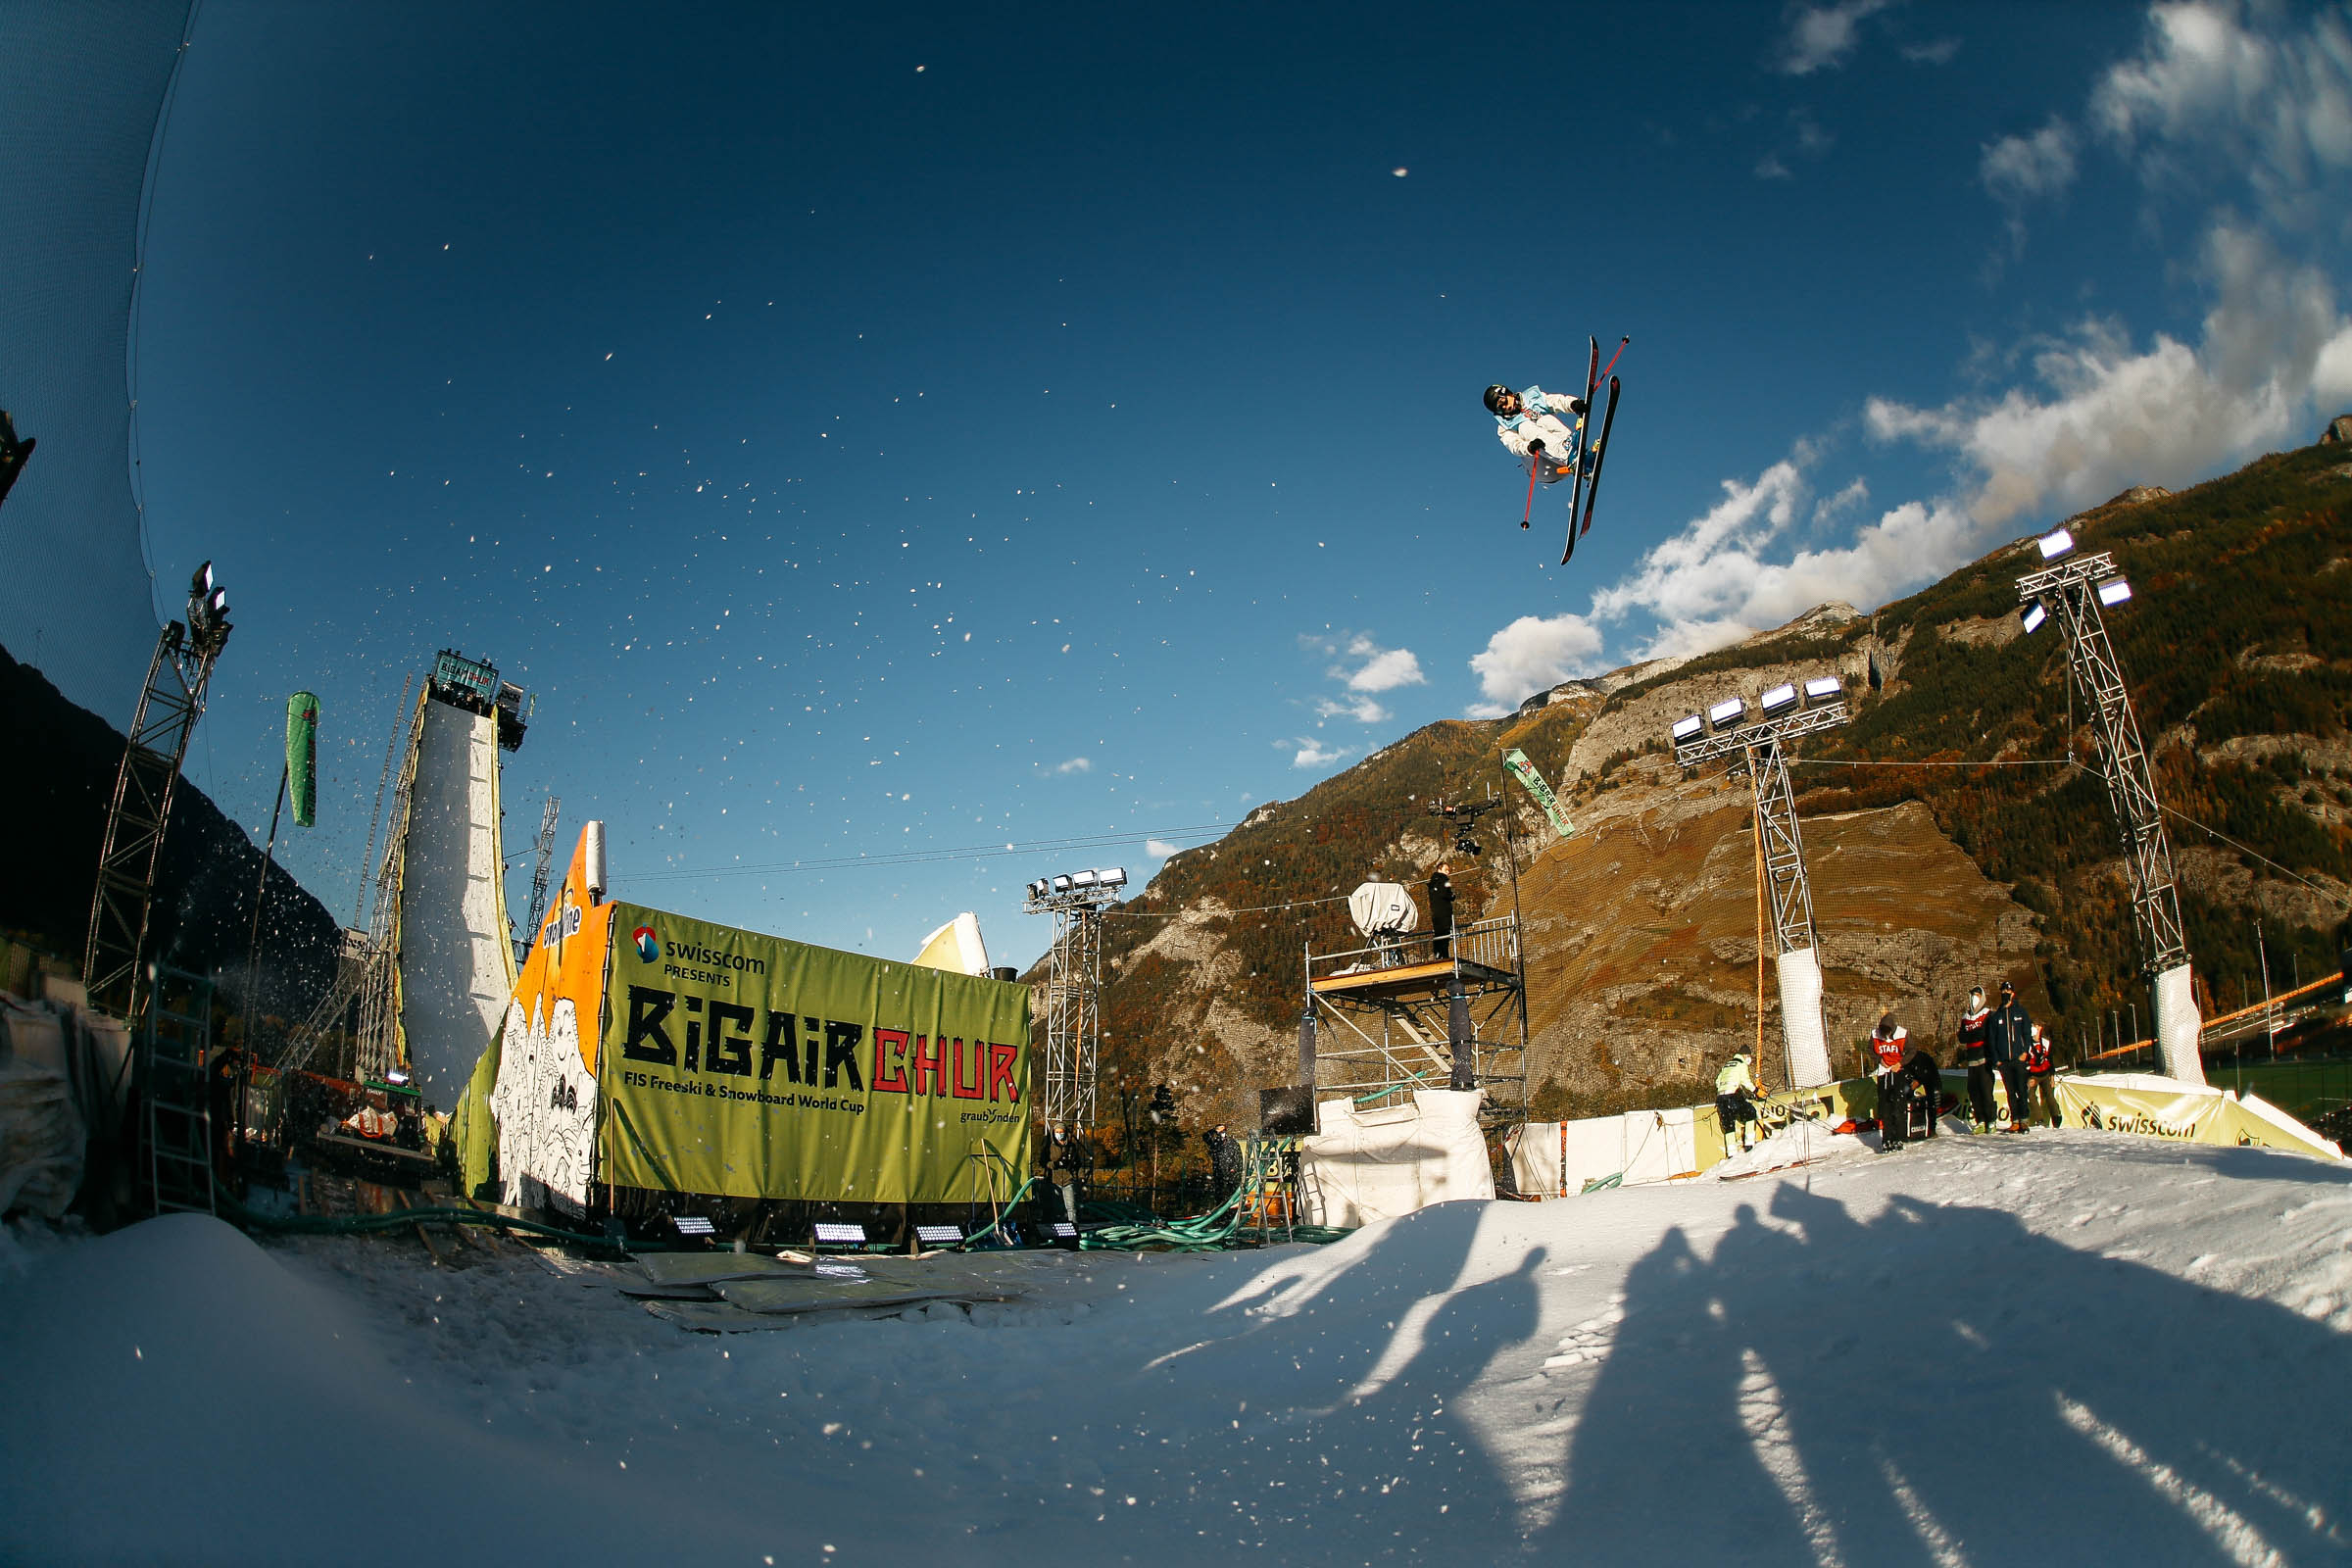 Monster Energy's Sarah Hoefflin Earns 2nd Place in Women’s Freeski Big Air at FIS Freeski and Snowboard 2021/2022 World Cup Season Opener in Chur